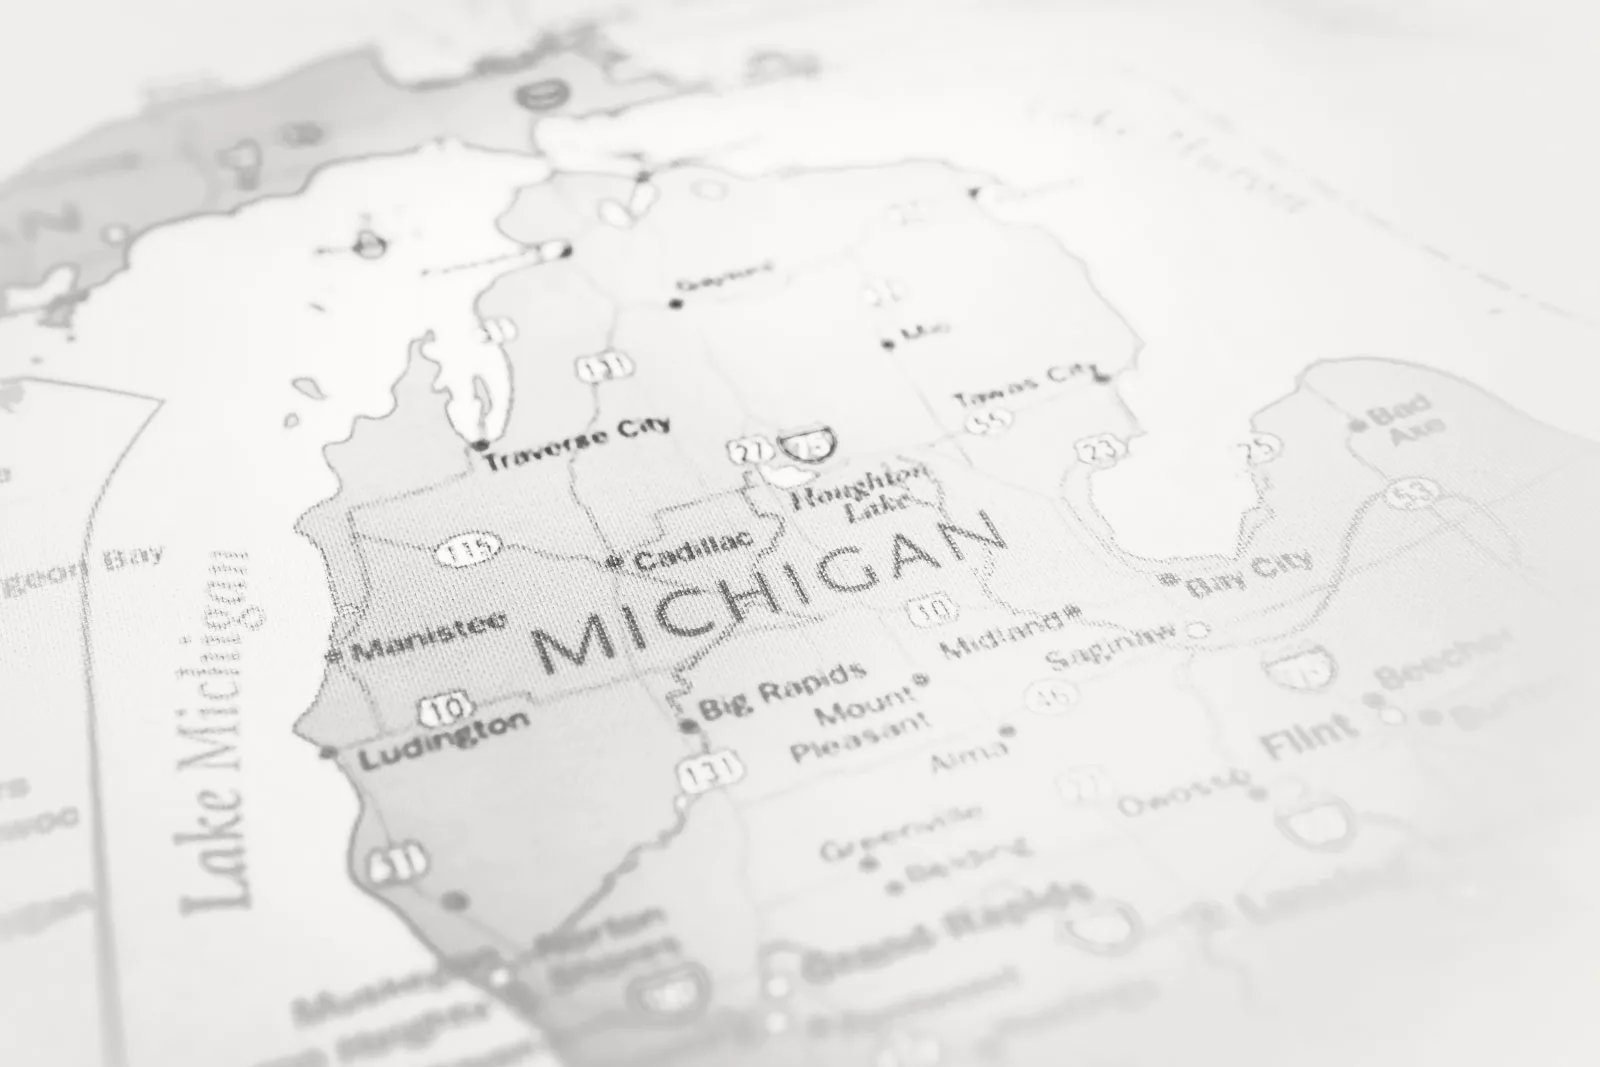 A clear map view of Michigan, with the Great Lakes prominently highlighted, showcasing their vast expanse, the state's geographical context, and the importance of these freshwater bodies to the region.